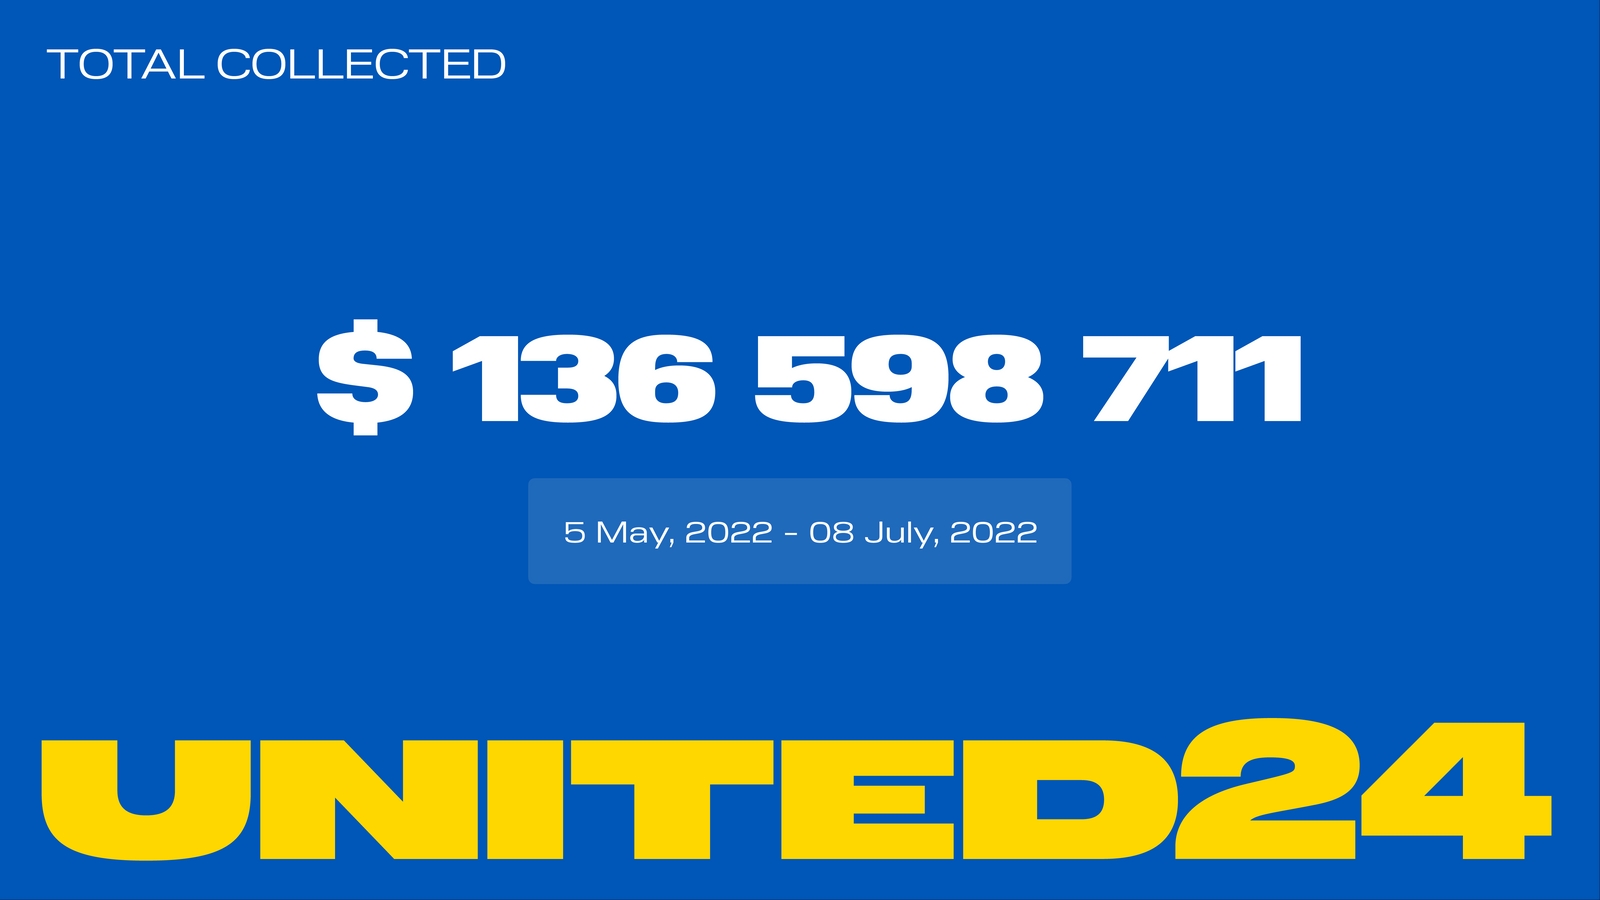 As of July 8, the Total Amount of Funds Raised via UNITED24 is $136,598,711